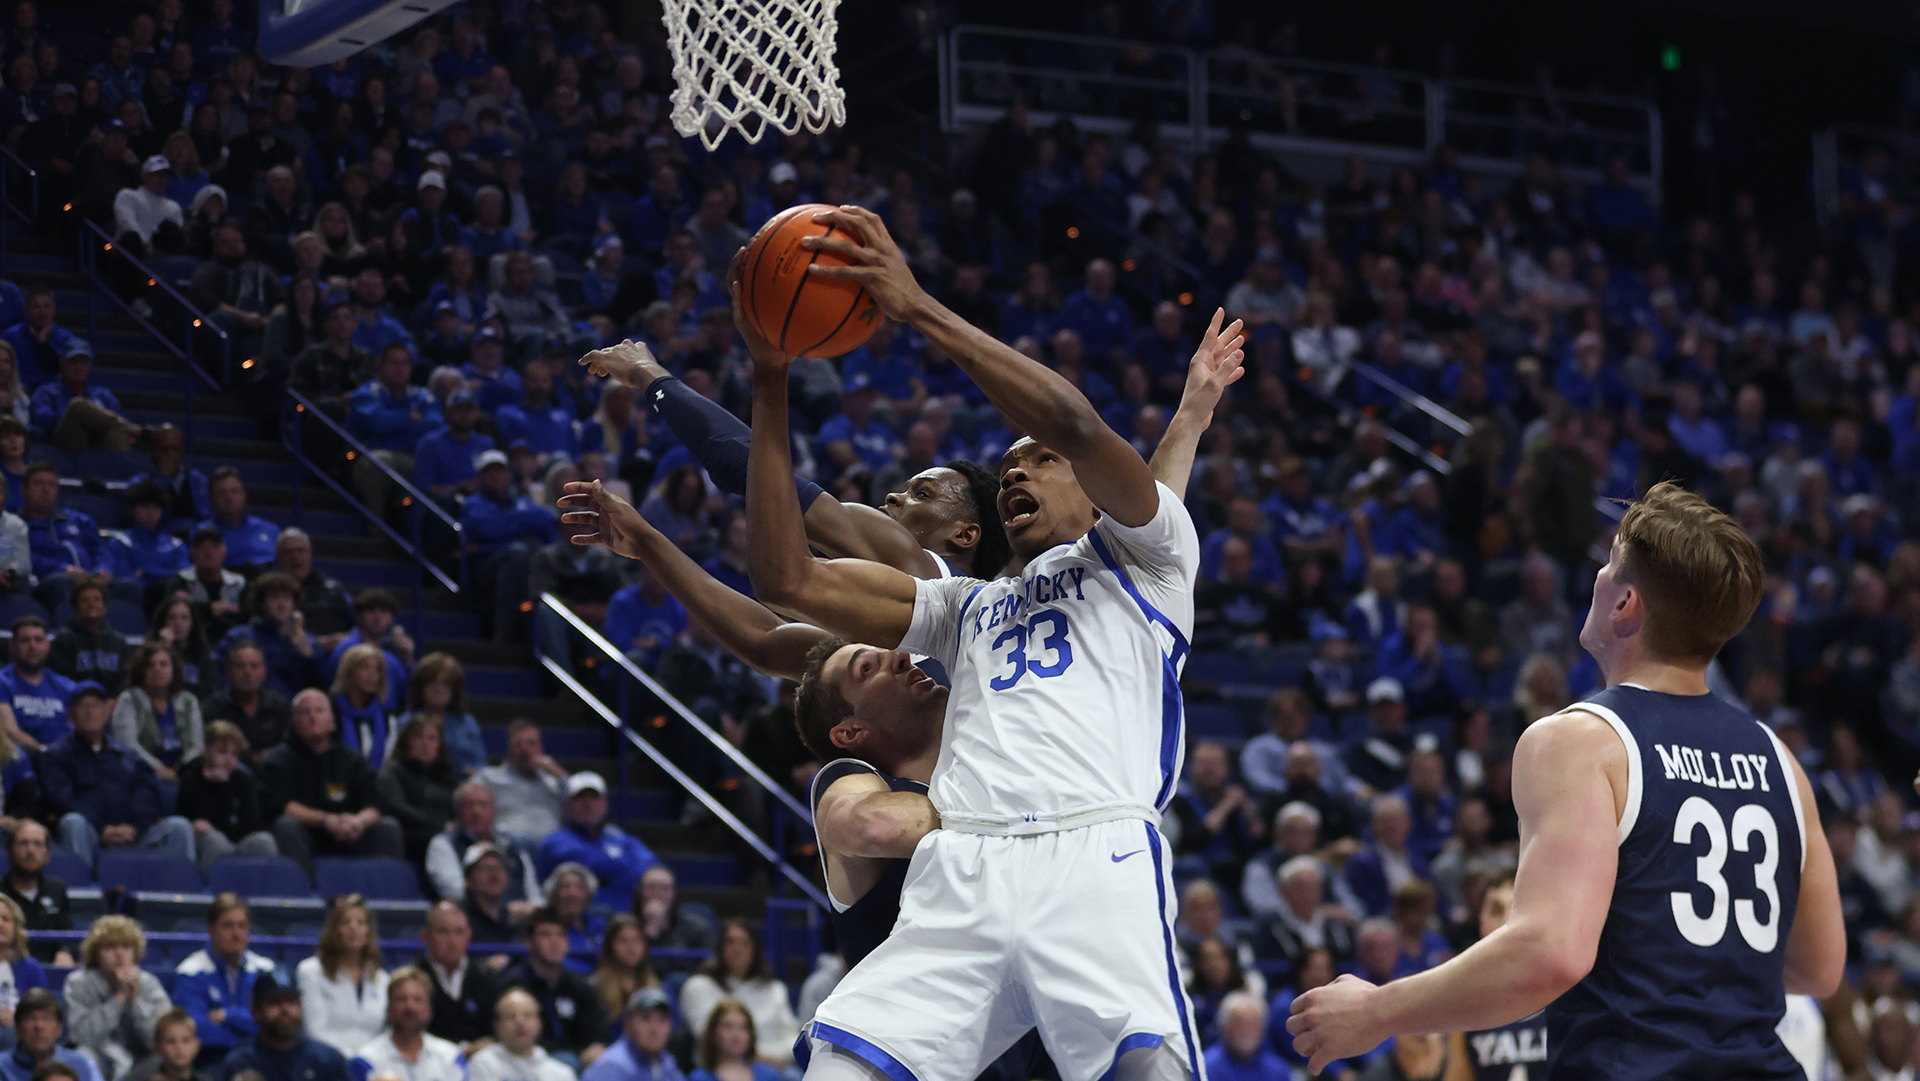 Kentucky-Yale Postgame Notes